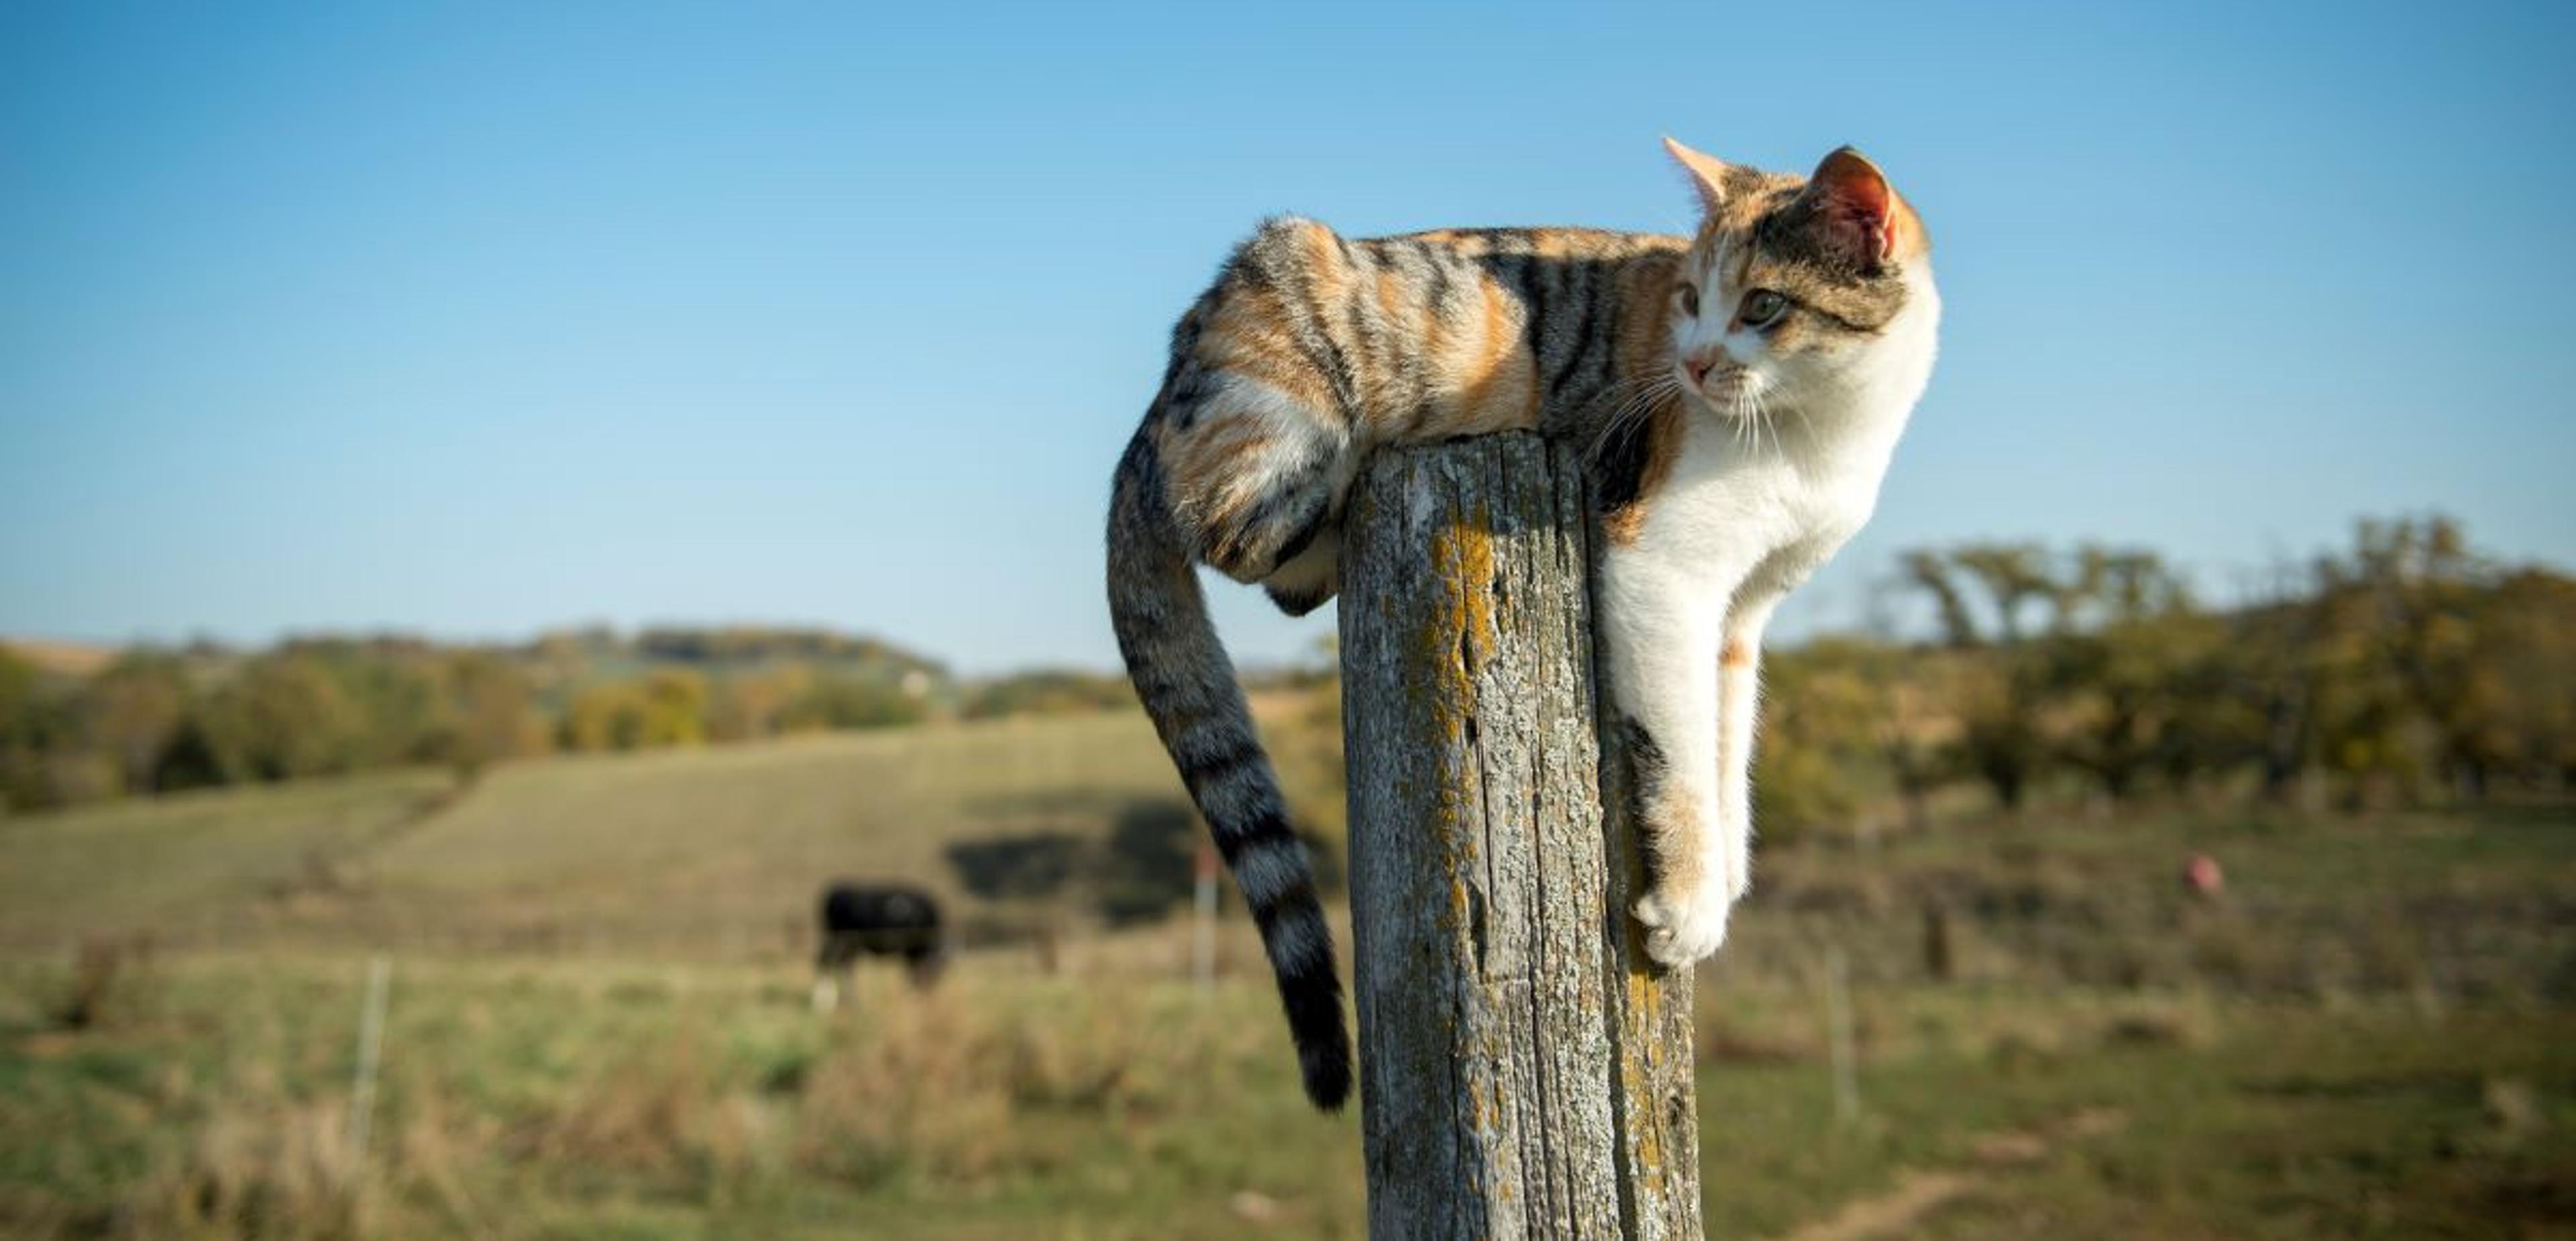 A cat sits on a fencepole at the Koester family farm in Illinois.